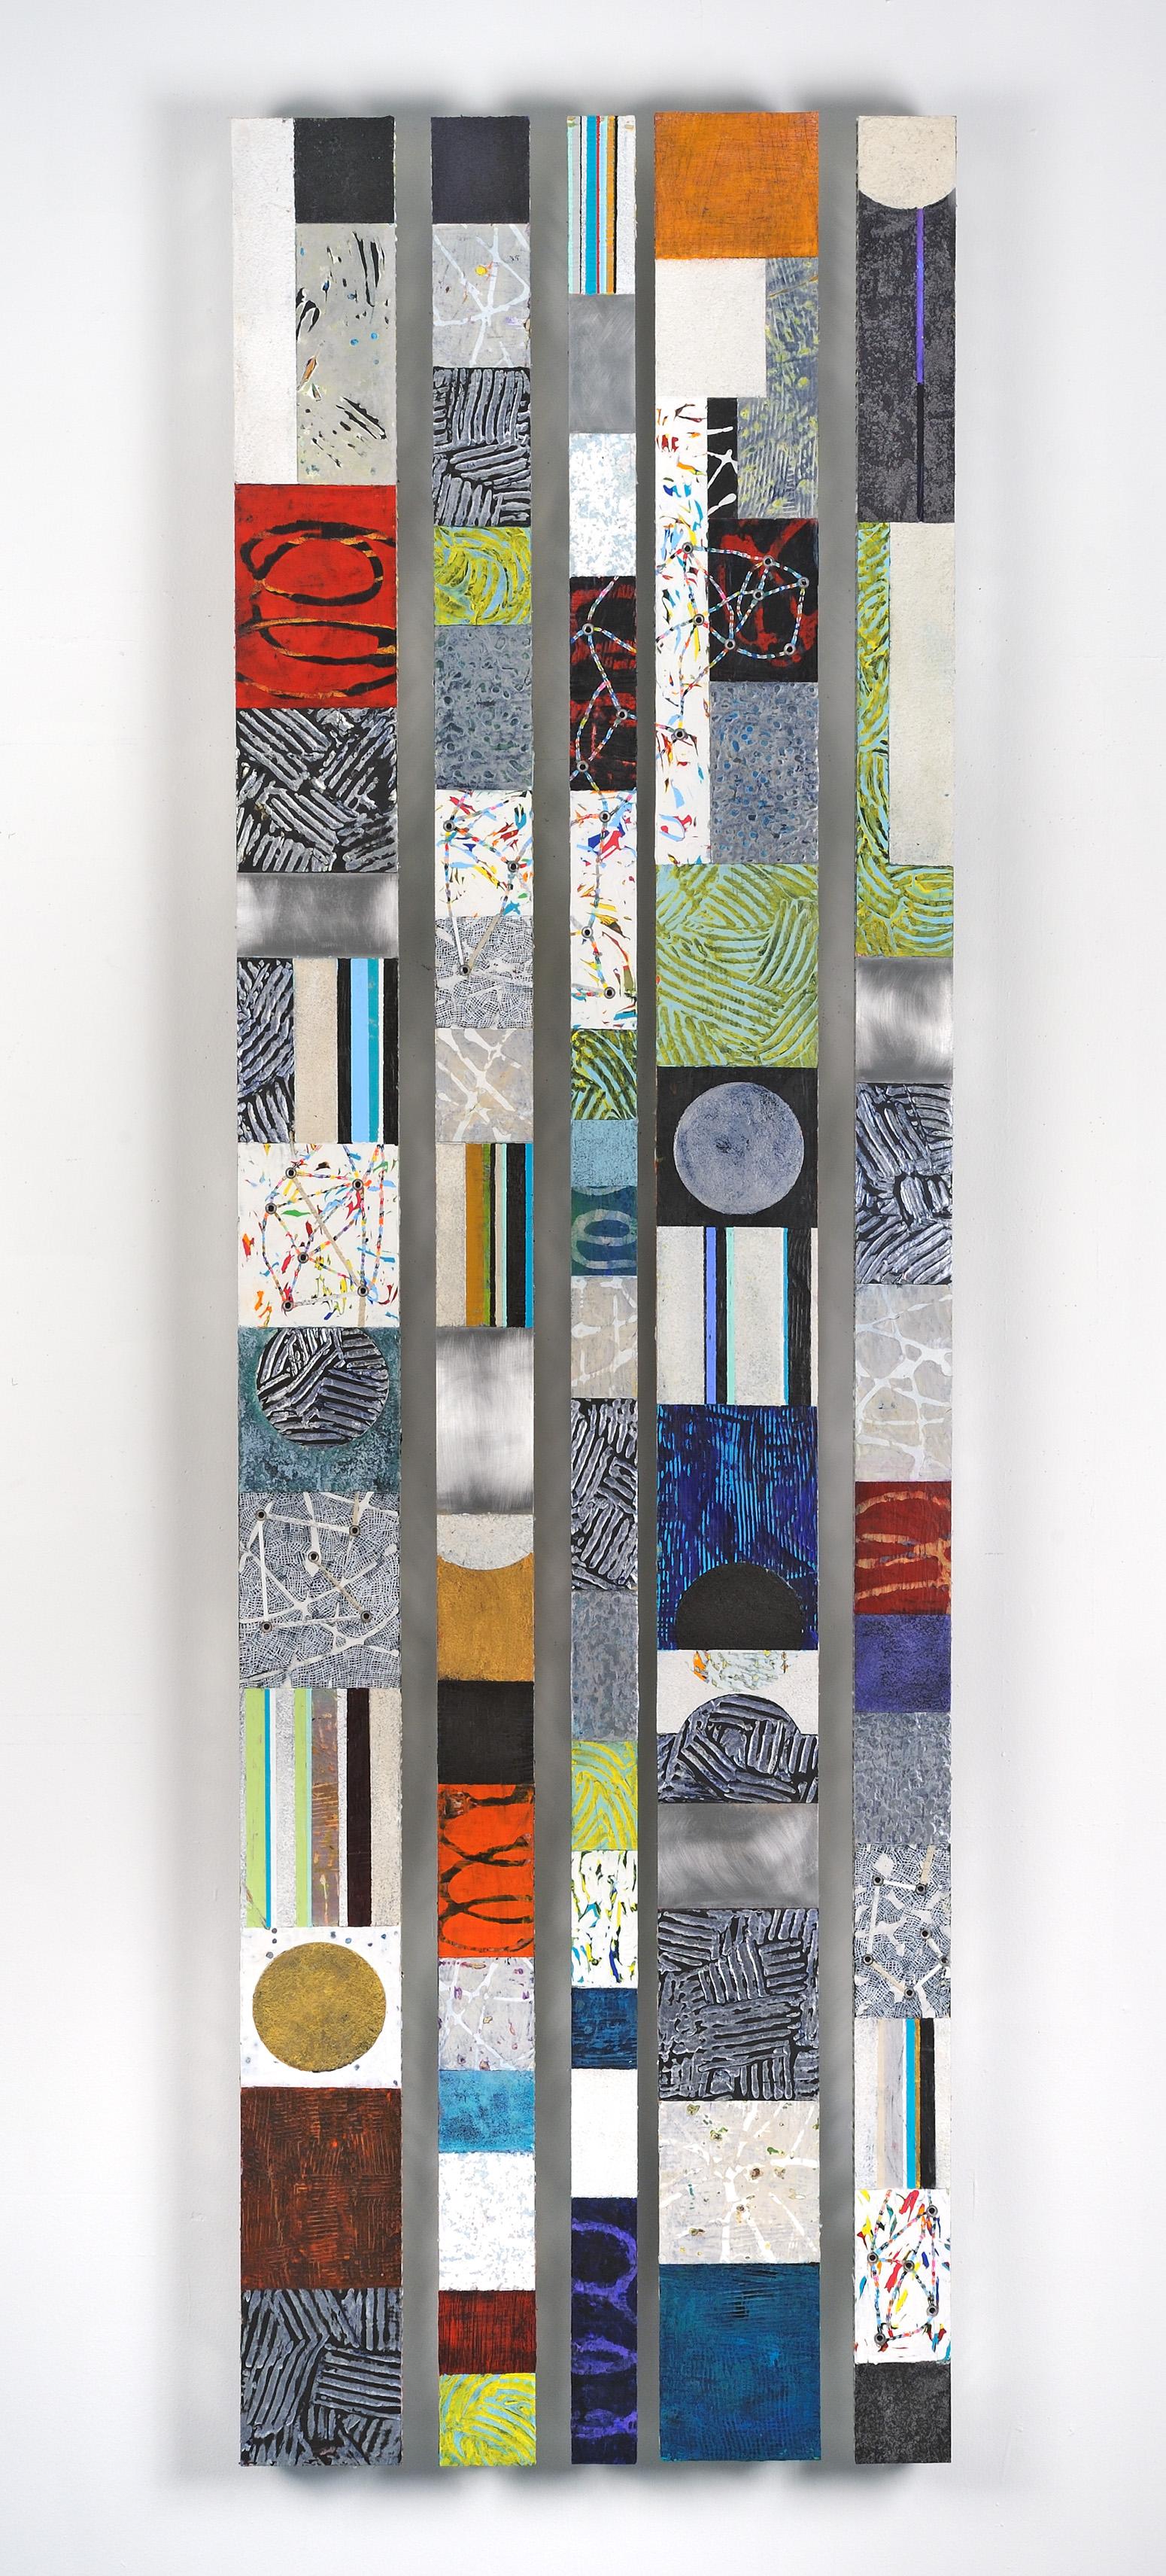 Francie Hester Abstract Sculpture - Strata 21 Set A, multicolored mixed media sculptural piece on aluminum